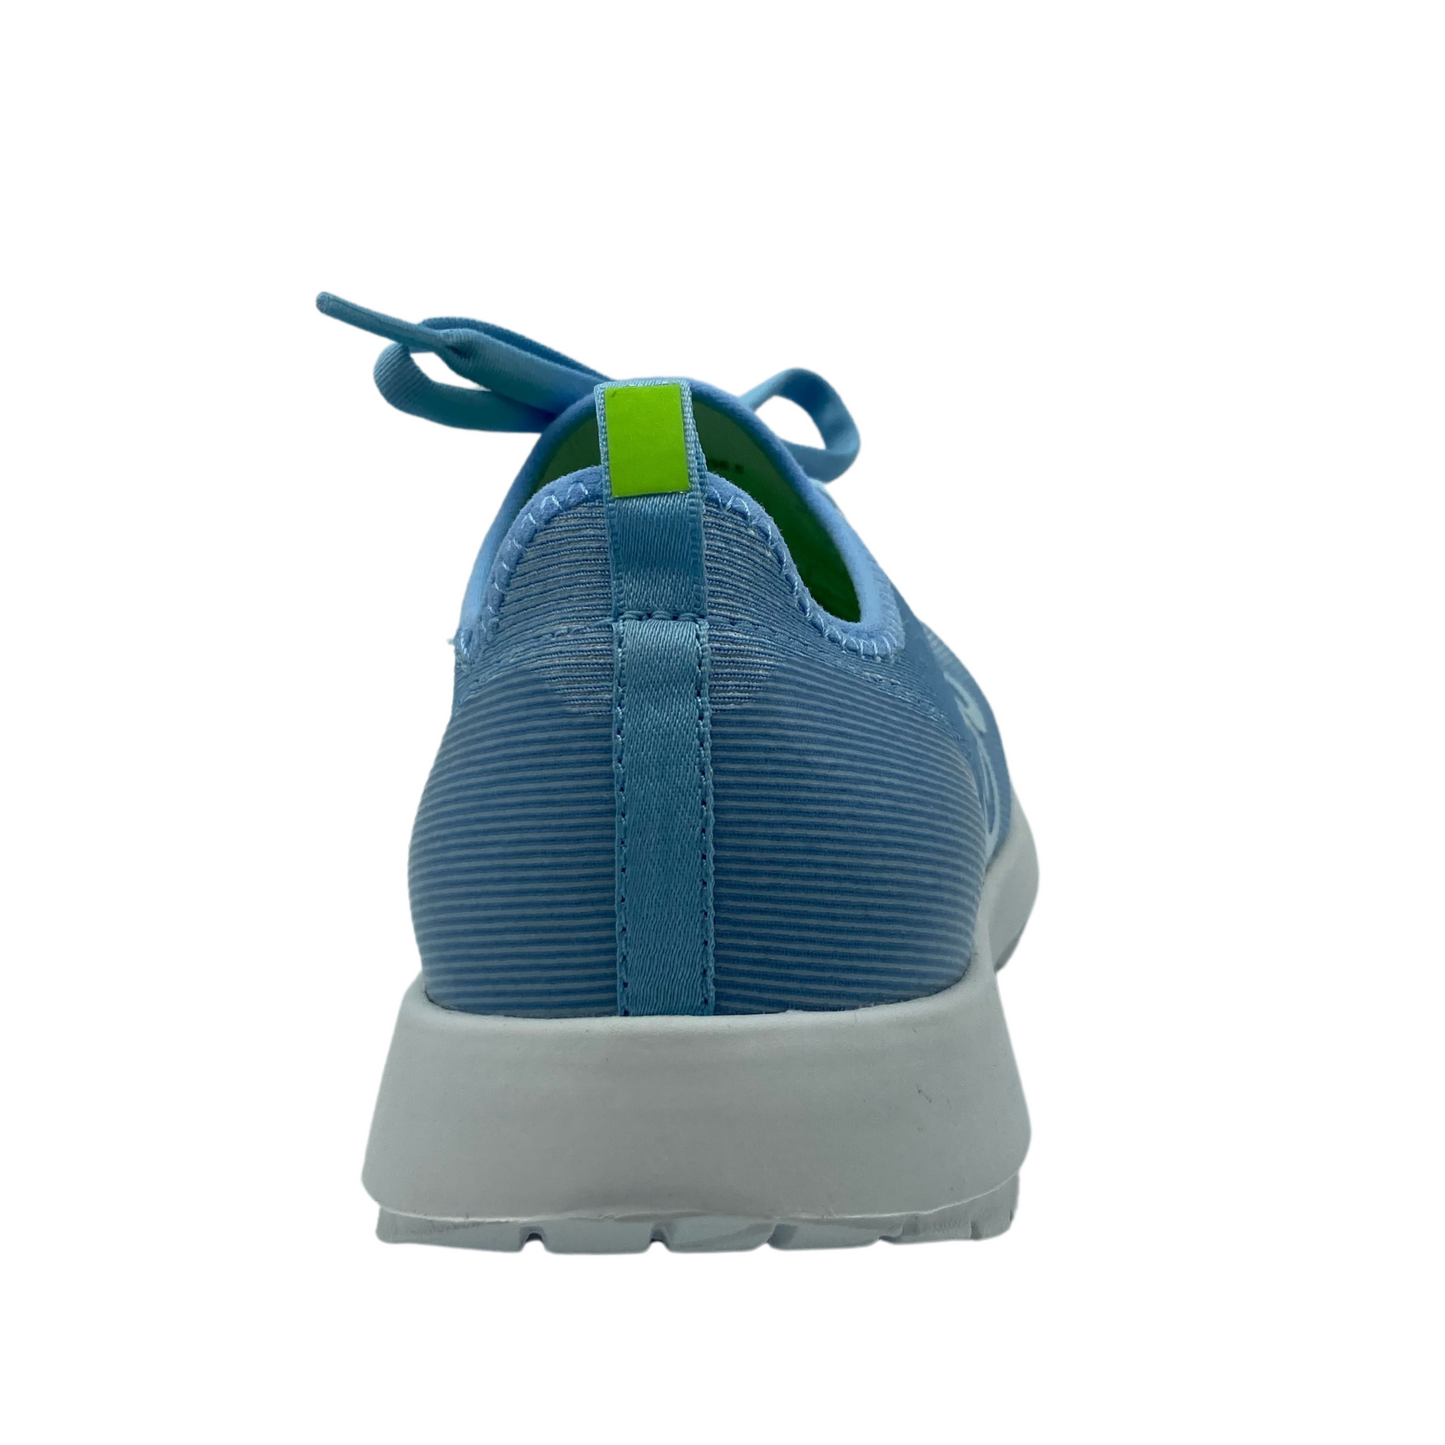 Hind view of heel of sneaker. Blue upper with blue and green pull tab and white sole